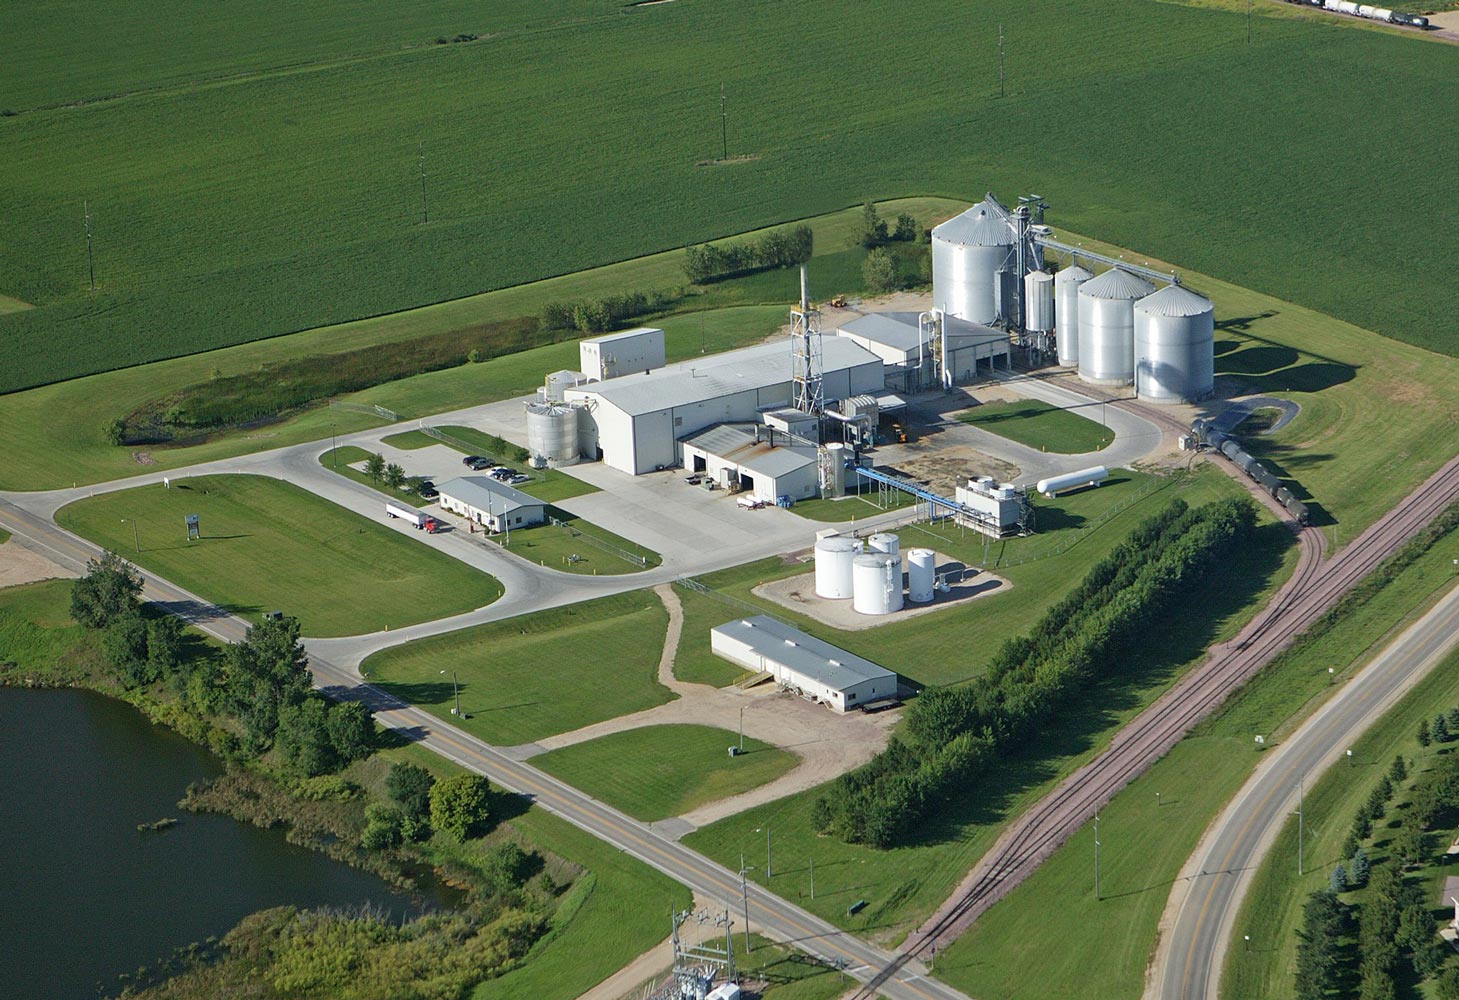 Gevo signs option for site of new biofuel facility for Trafigura